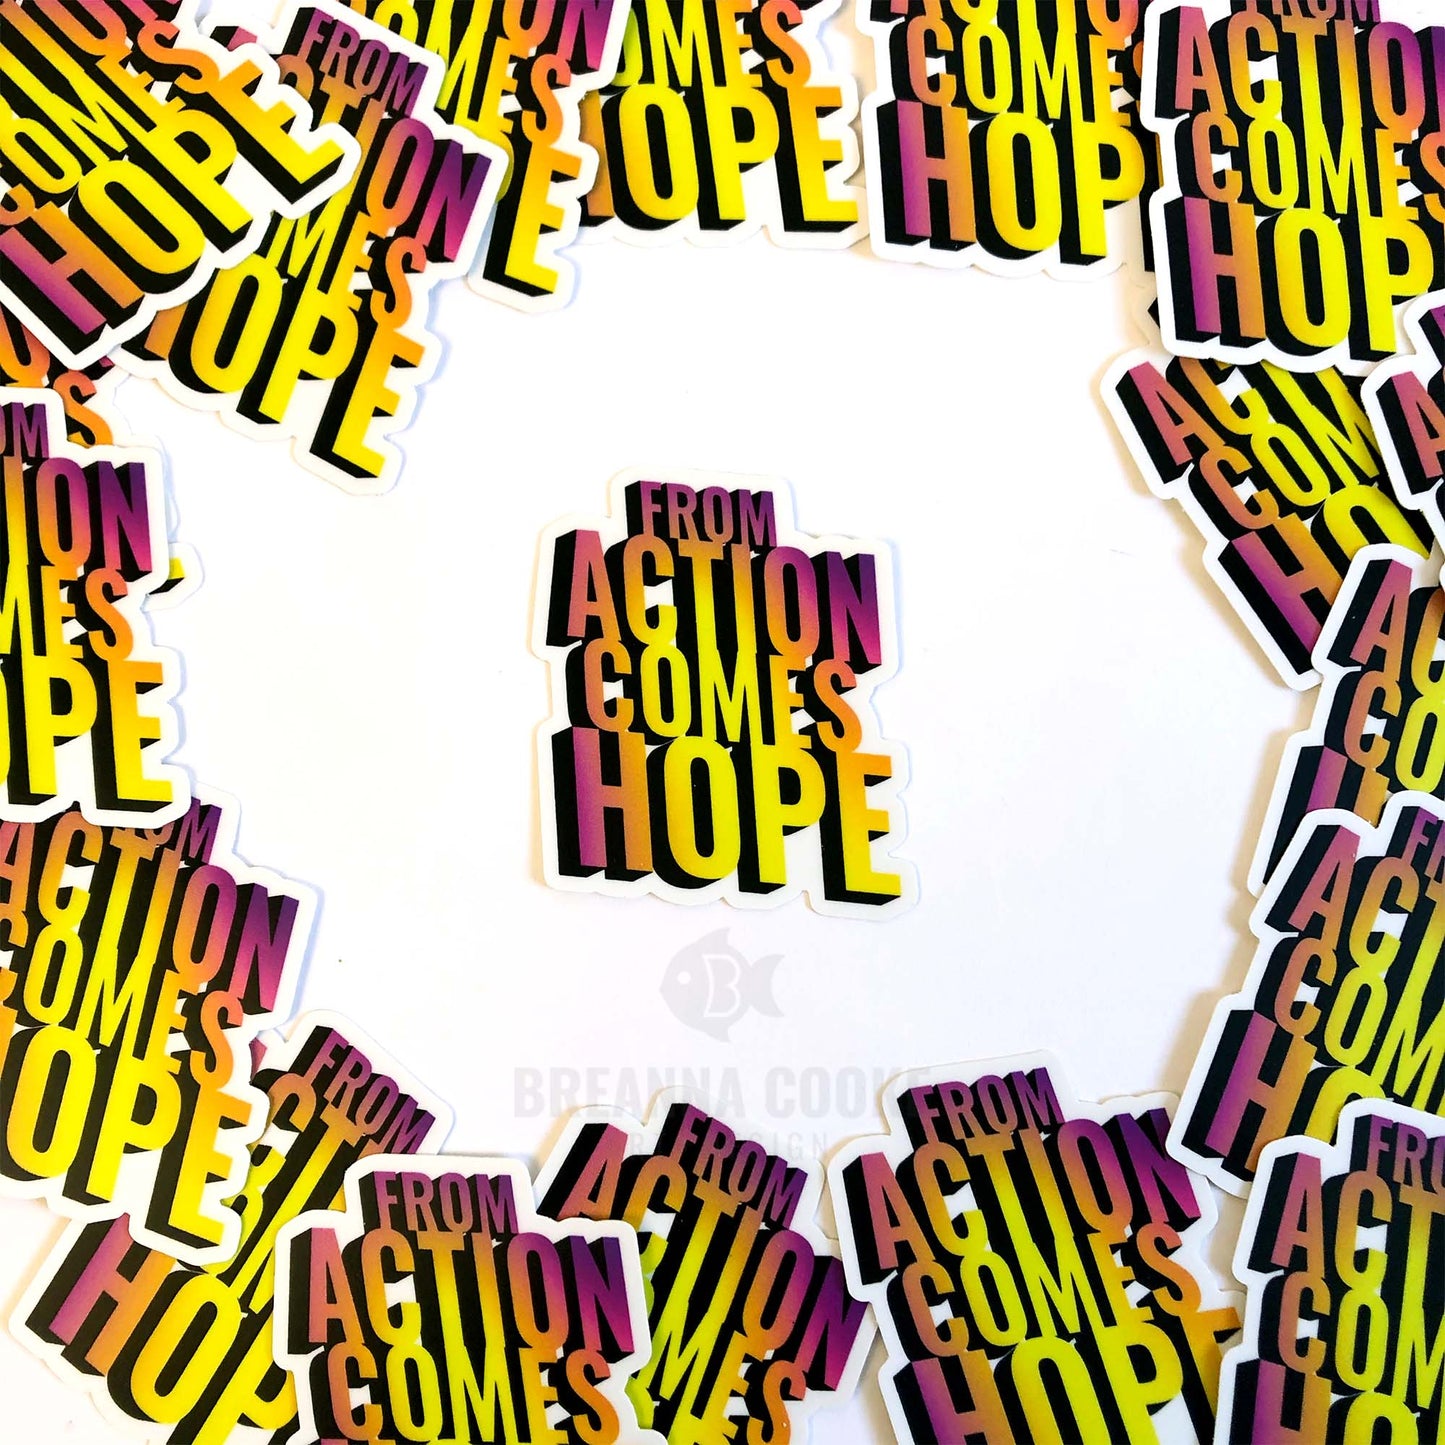 From Action Comes Hope | Sticker | 3 x 3 in